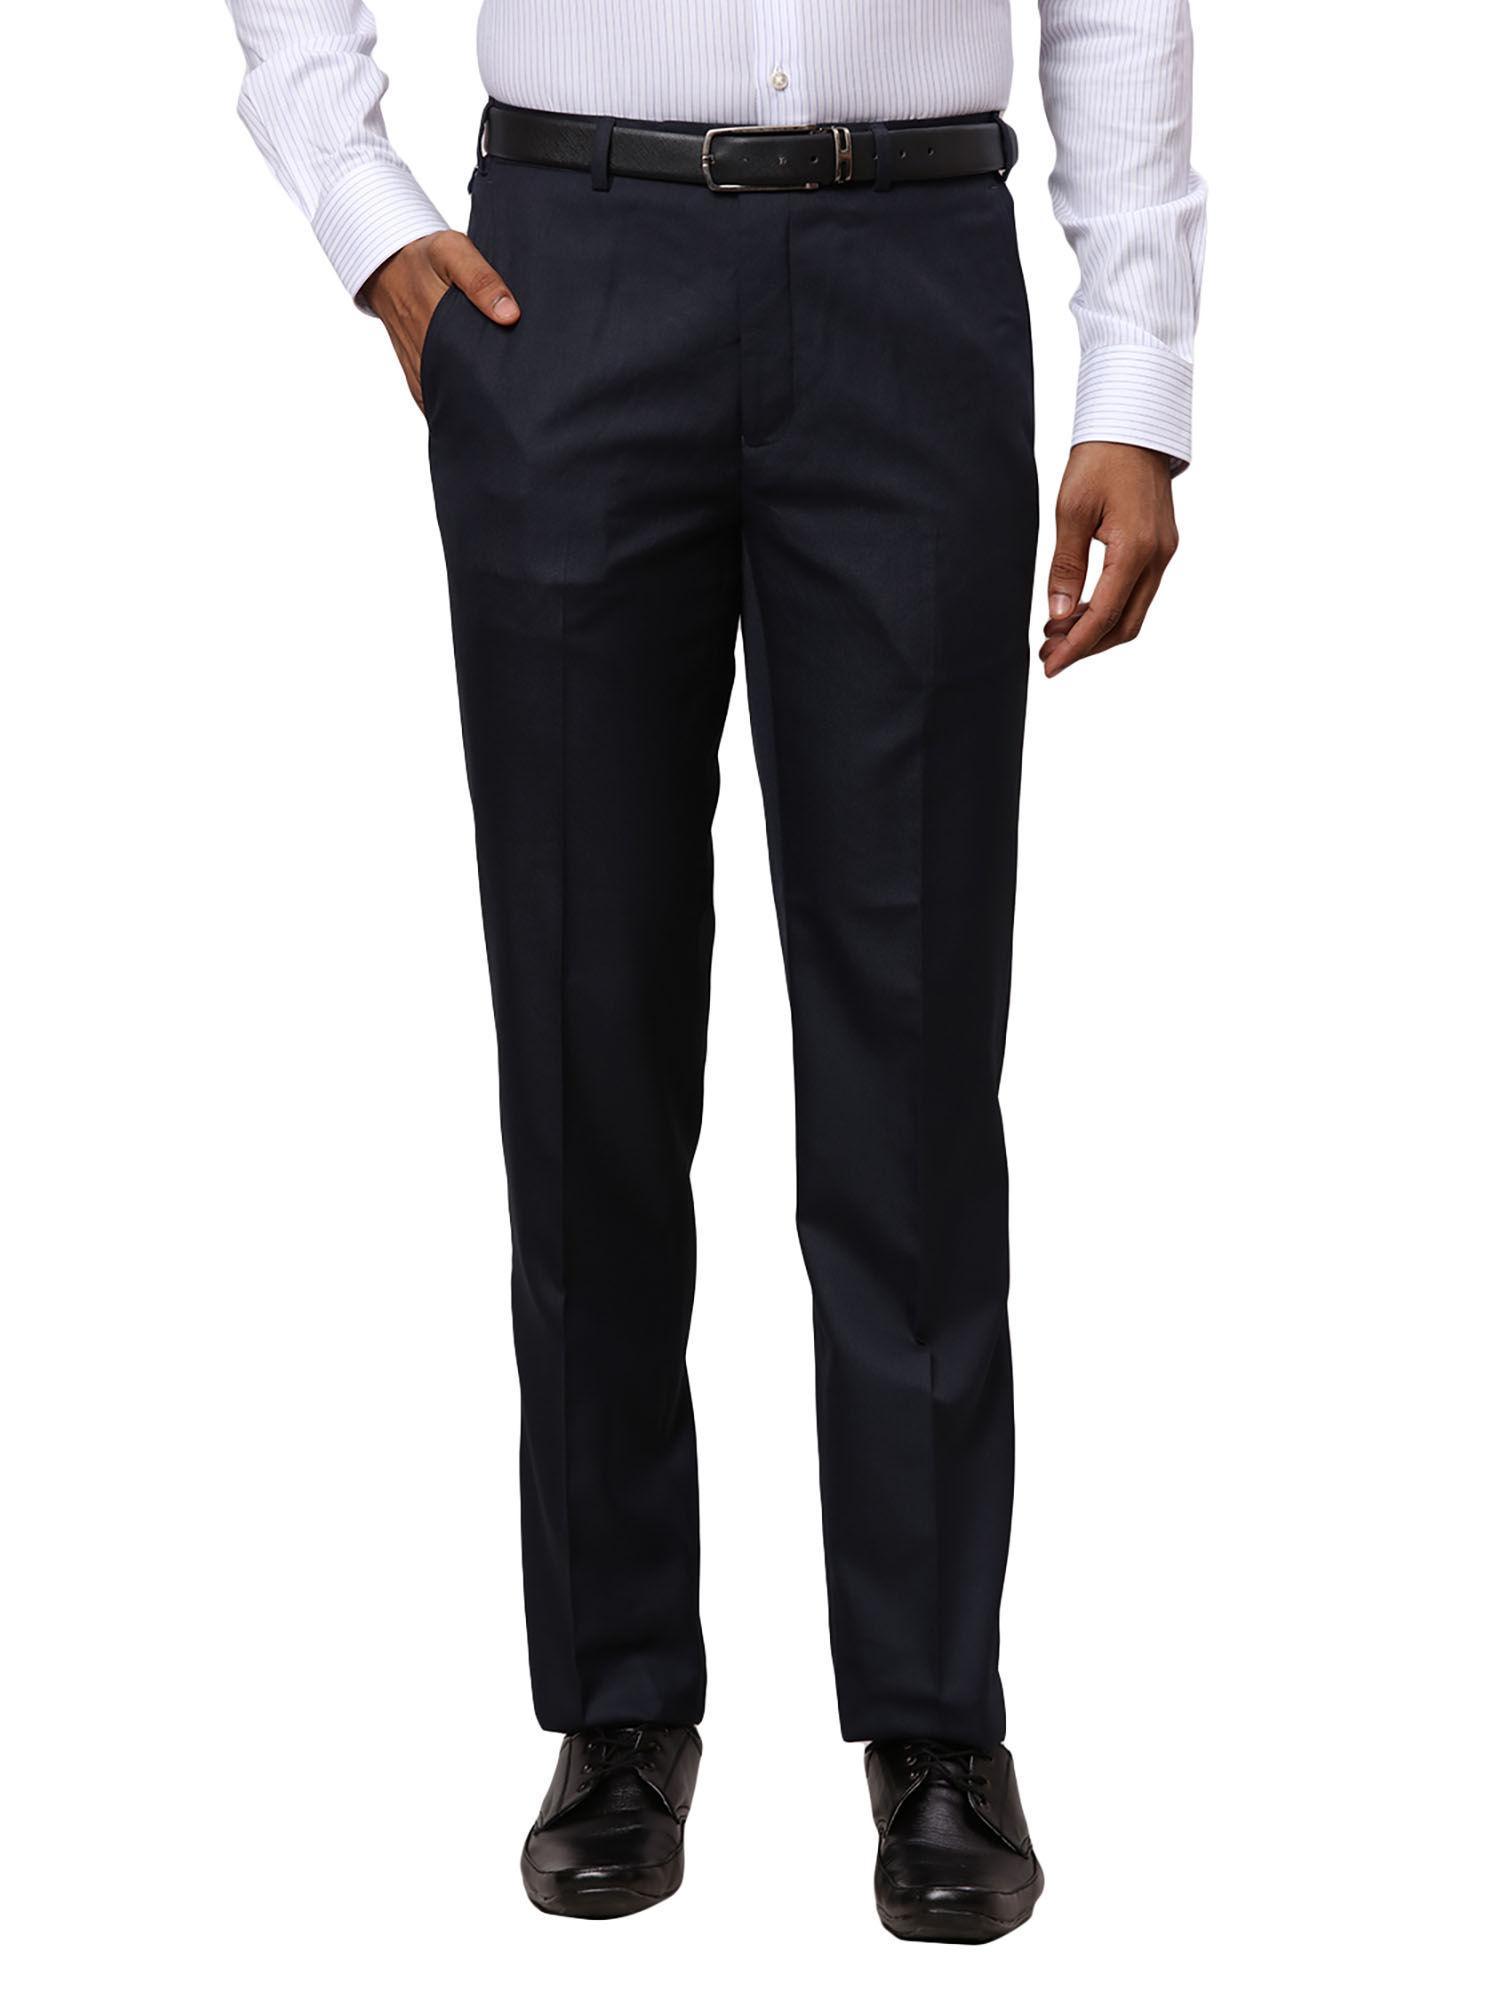 comfortable fit solid blue trouser